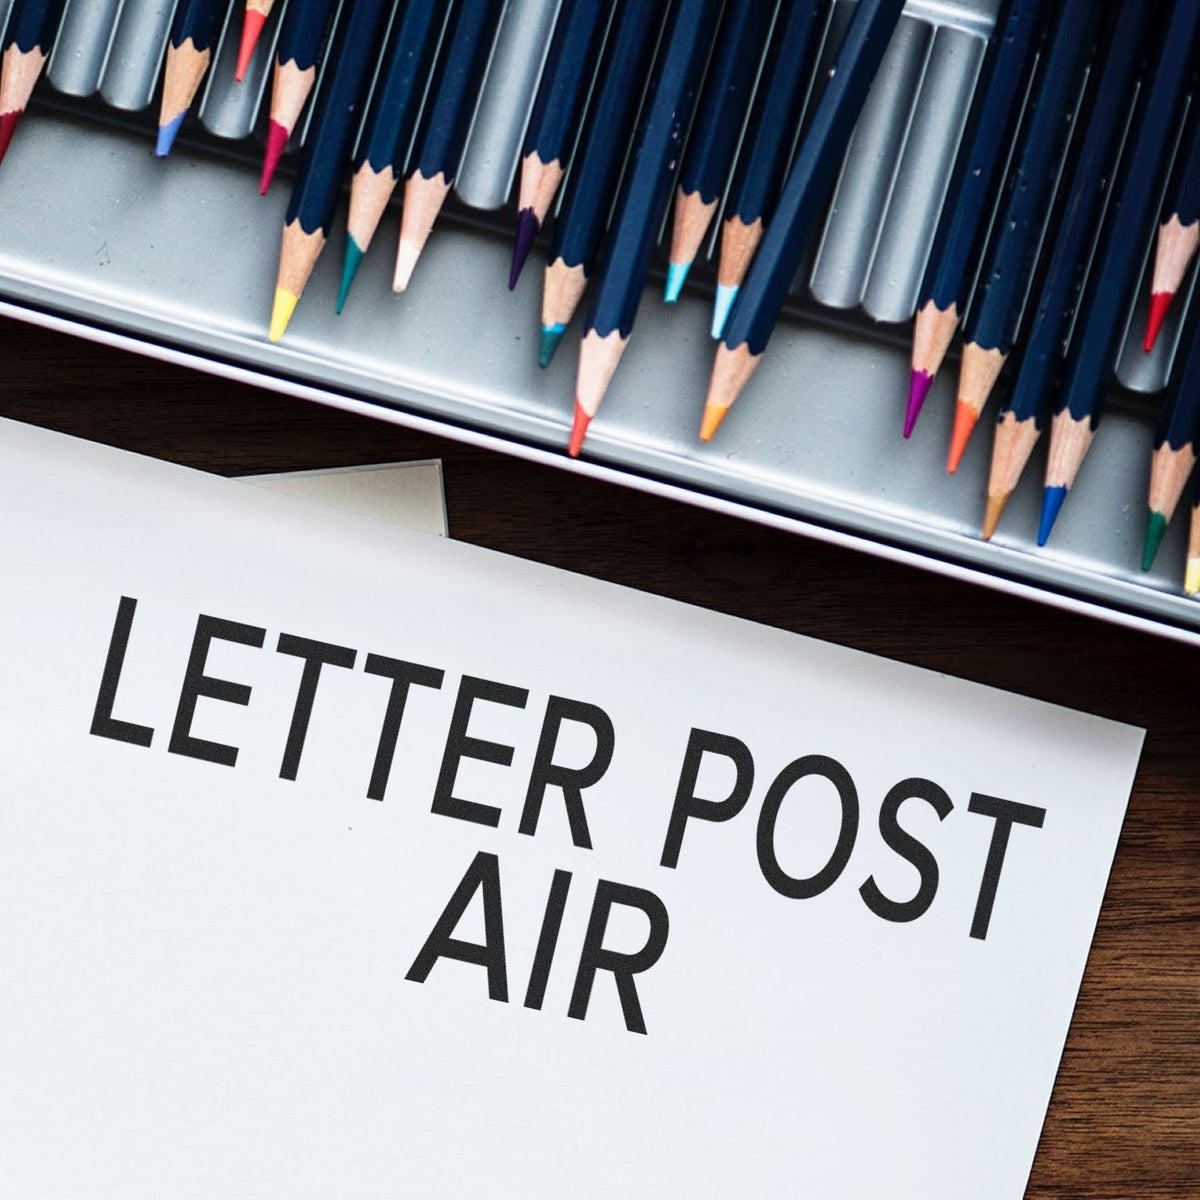 Large Letter Post Air Rubber Stamp Lifestyle Photo